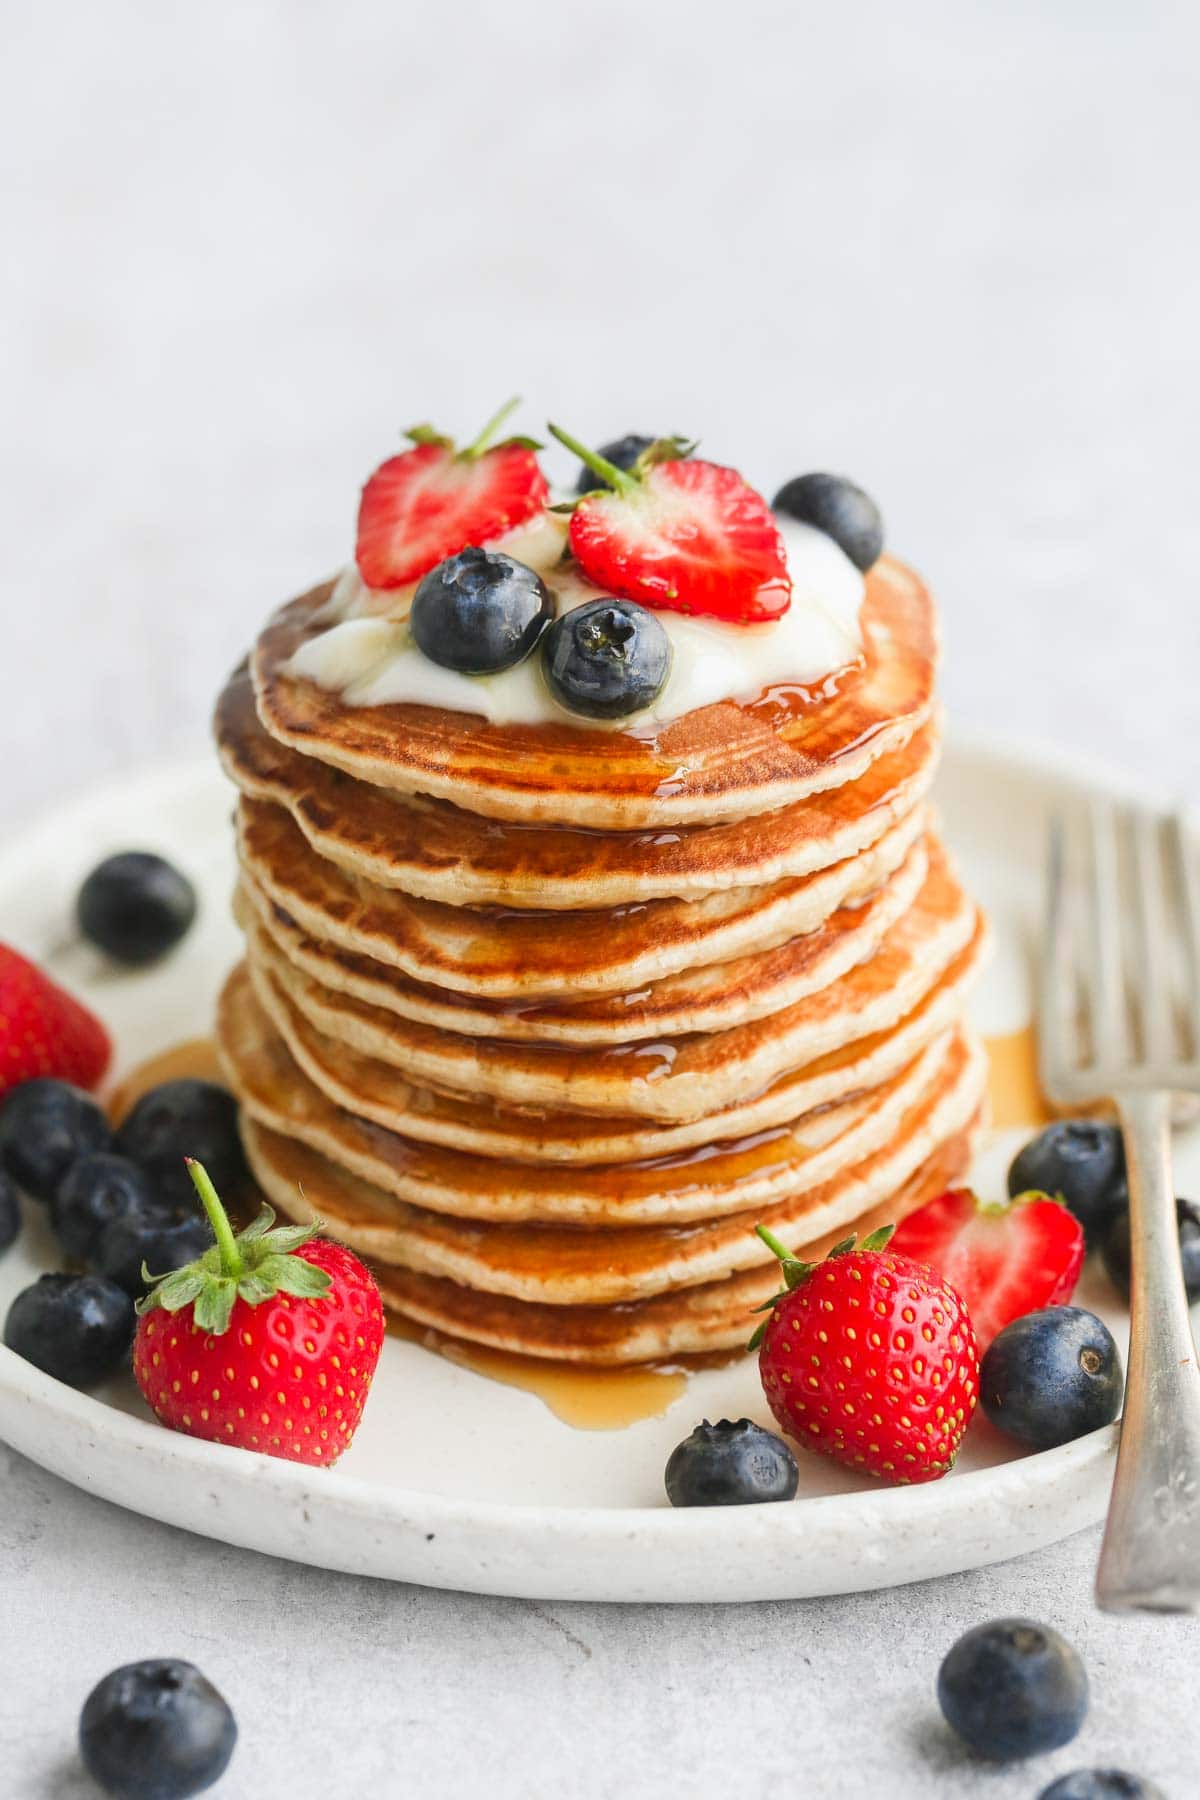 A stack of pancakes on a white plate with fresh fruit